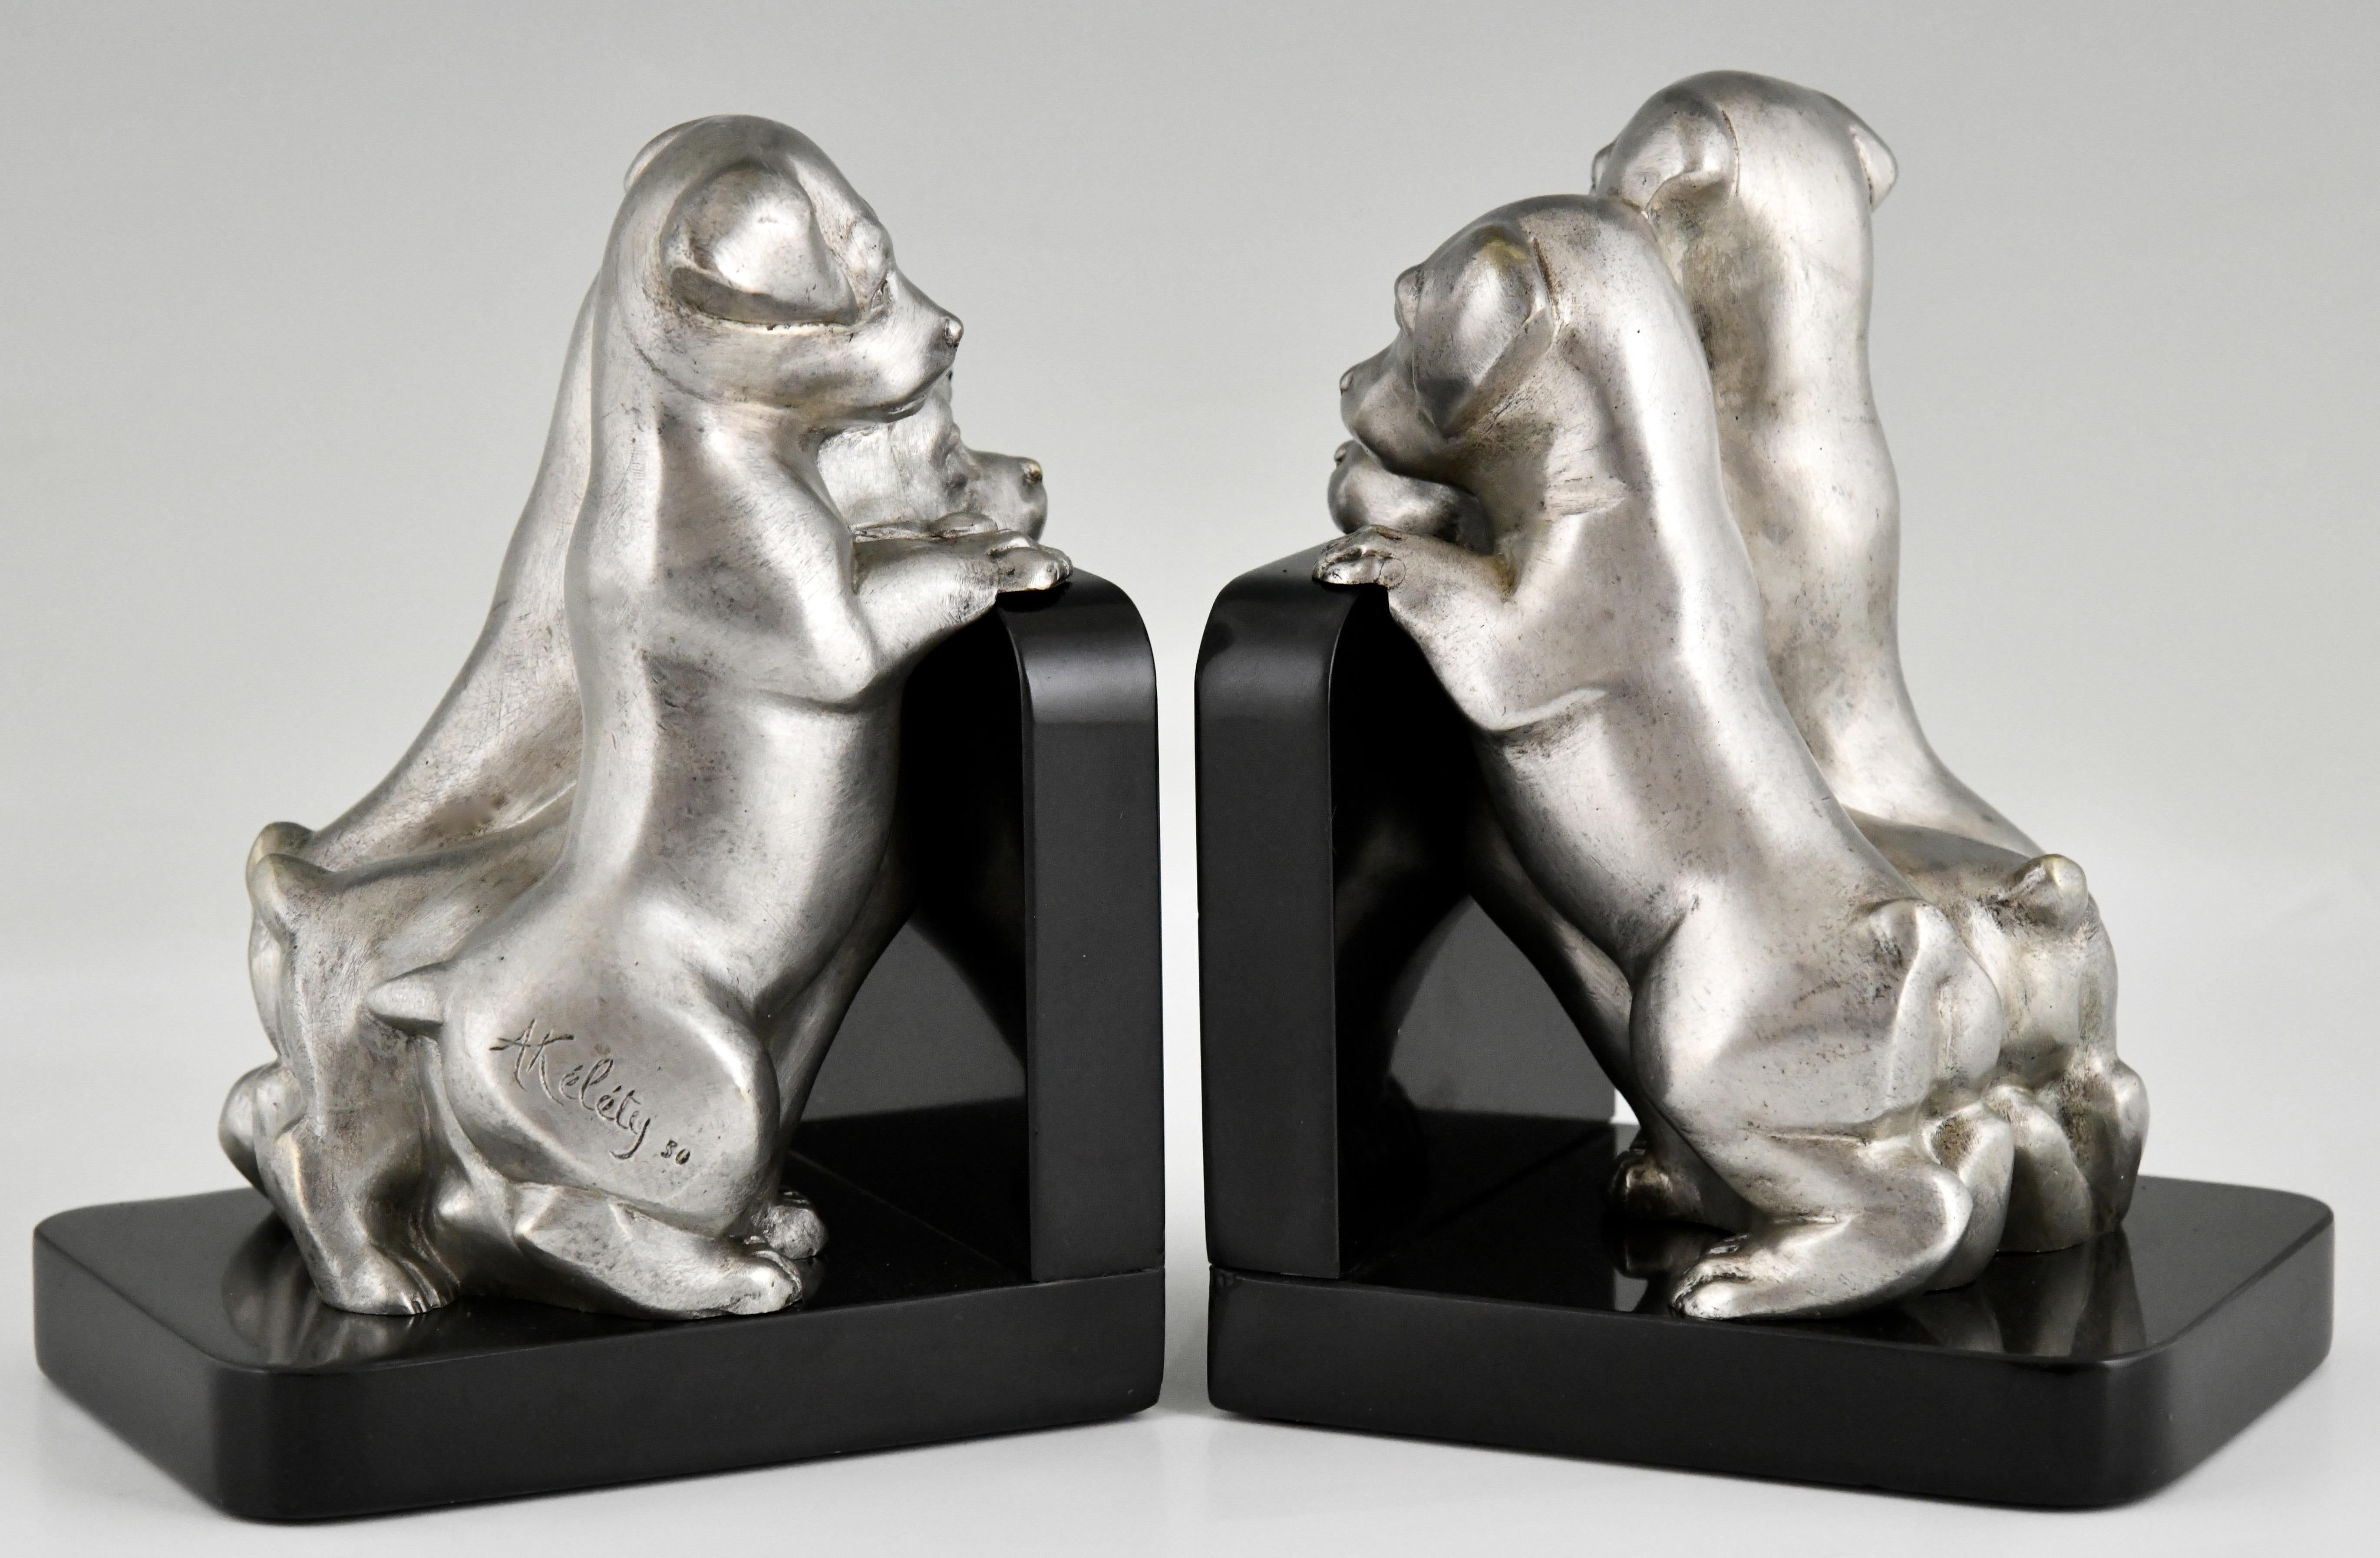 Art Deco bronze dog bookends by Alexandre Kelety
Bronze with silver patina. Belgian Black marble bases
France 1930. 
Signed A. Kelety with stamped number. 
Information on the artist:
Art Deco sculpture by Victor Arwas, Academy. 
Art Deco and